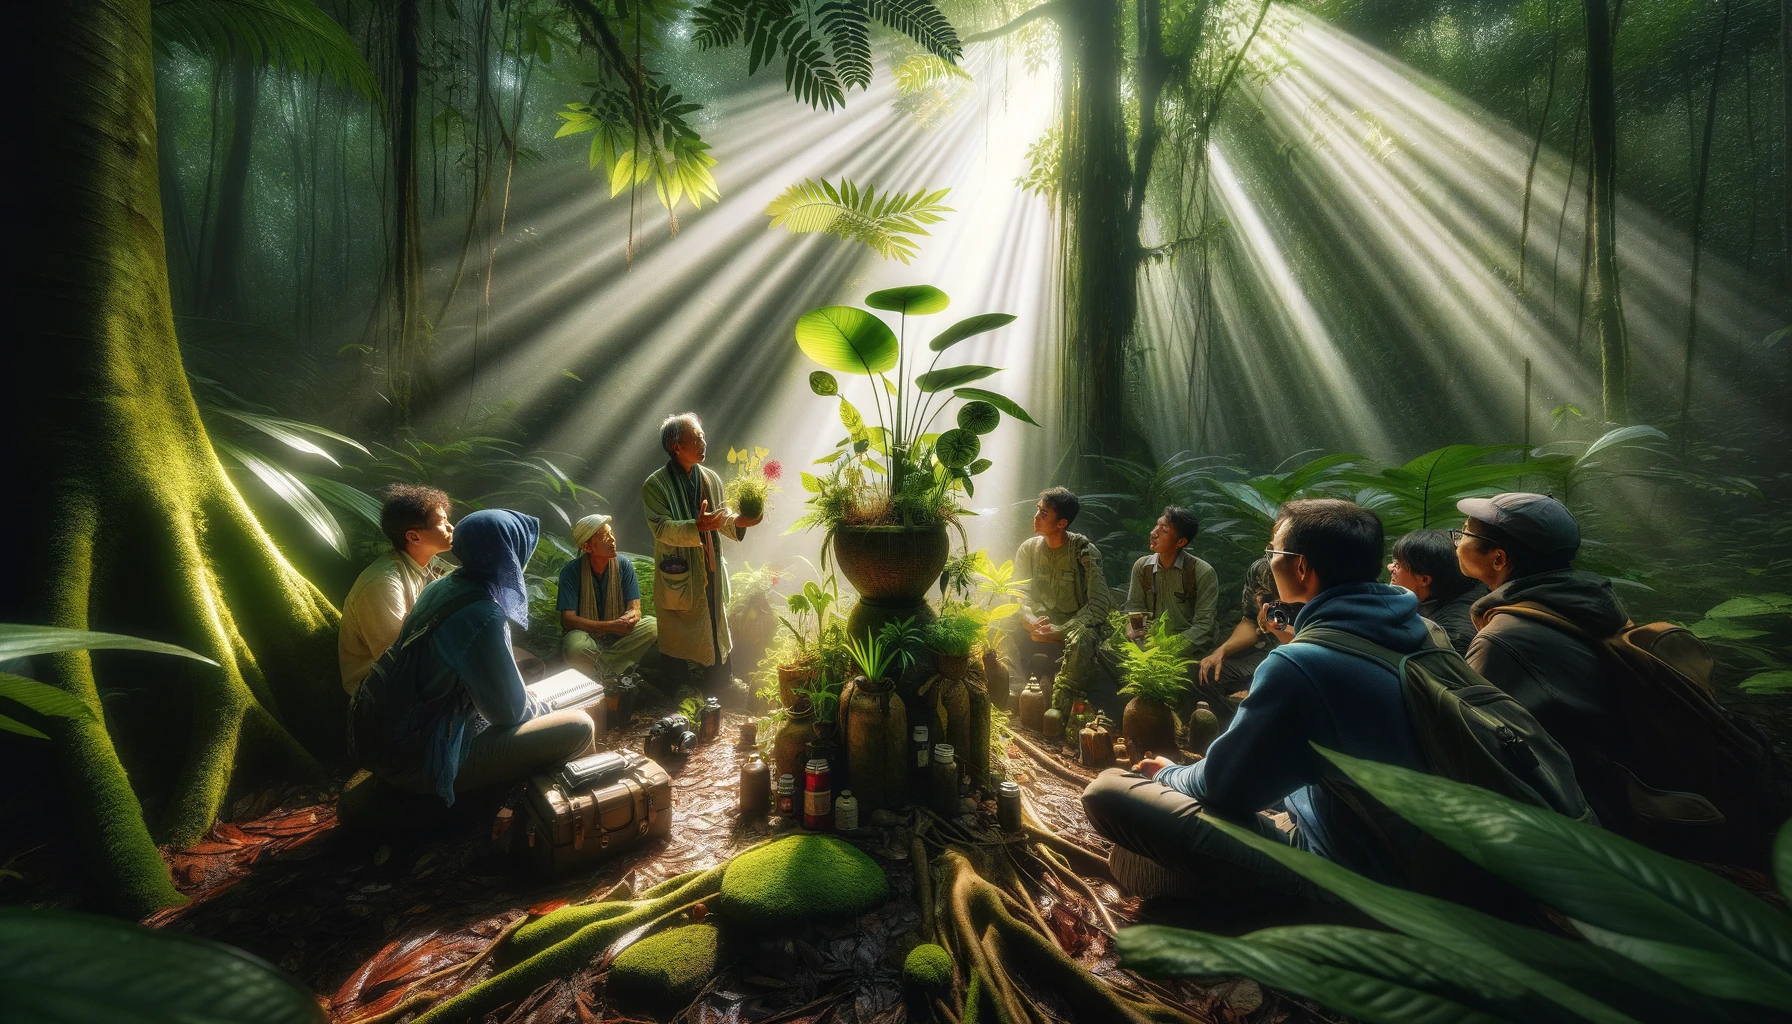 Experienced ethnobotanist sharing insights on plant medicine with students in a jungle clearing, illuminated by mystical shafts of light. Holding exotic plants, the scene embodies adventure and discovery, highlighting the rich biodiversity and ancient knowledge of the jungle. This image captures the reverence for plant medicine, inviting viewers into the wonder of natural world insights